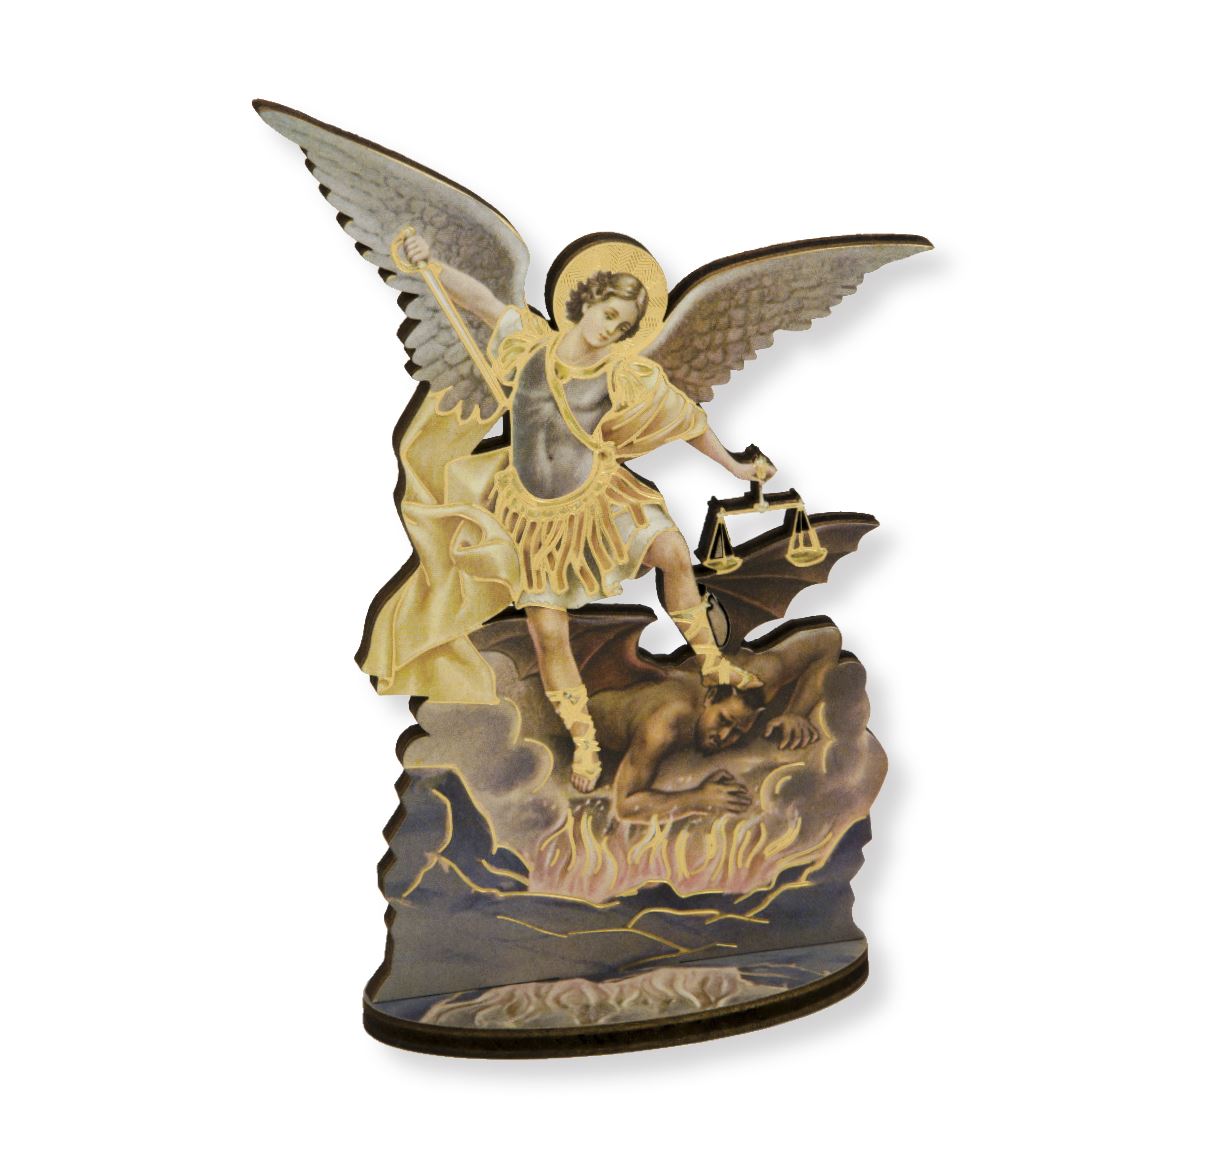 Saint Michael 6" Gold Foil Laser Cut Wooden Saint Statue. Made in Italy.